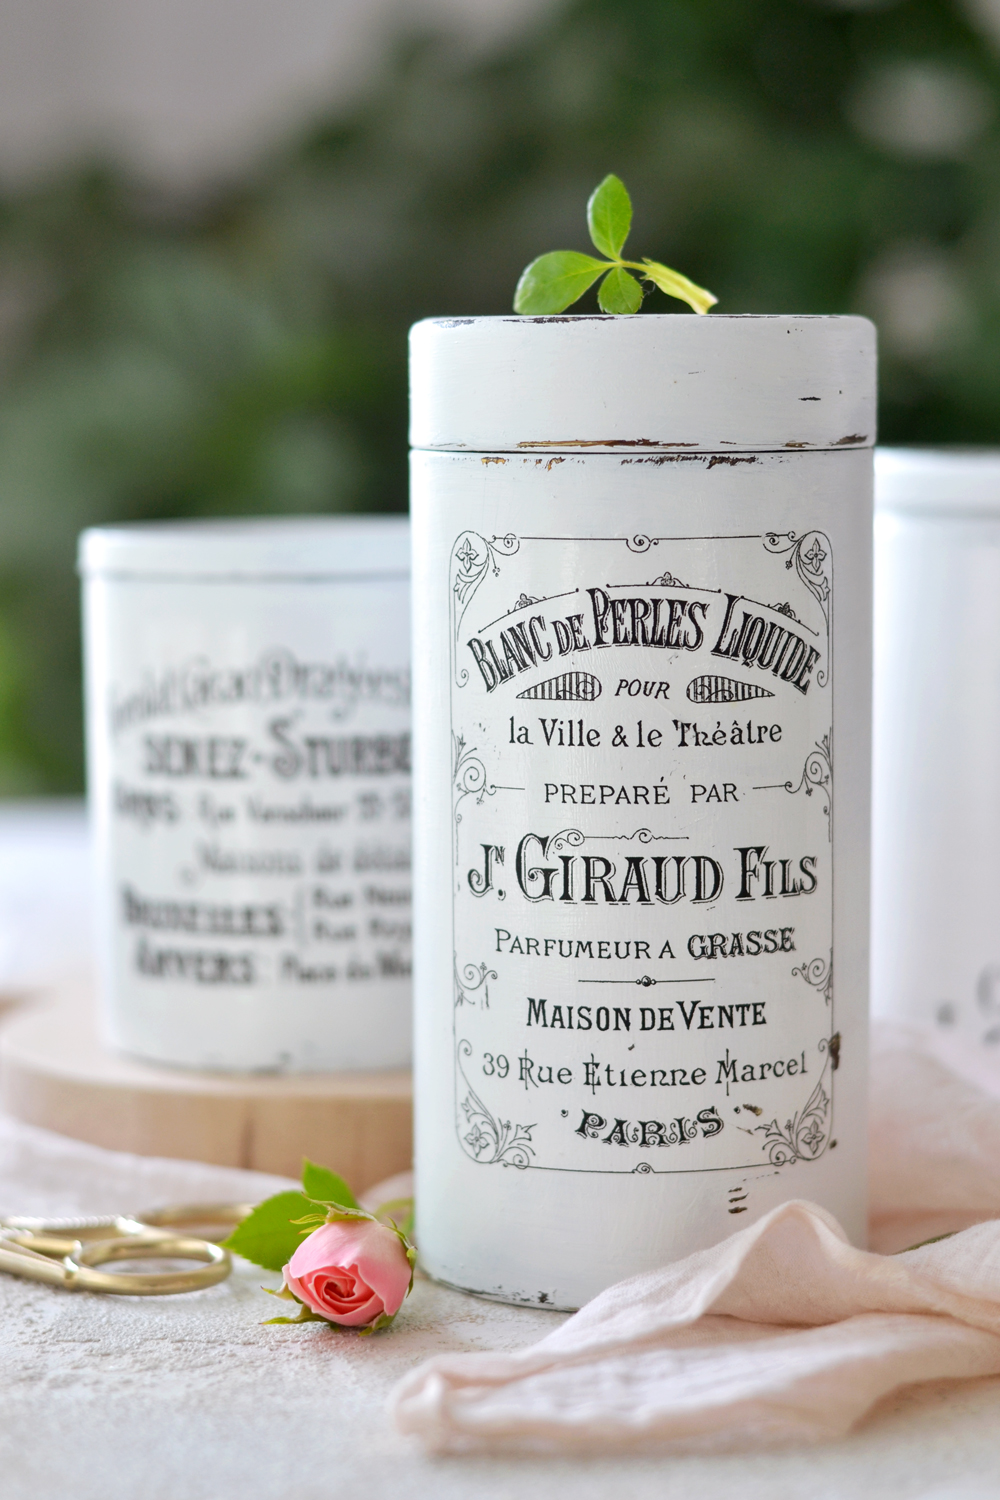 finished containers with french labels